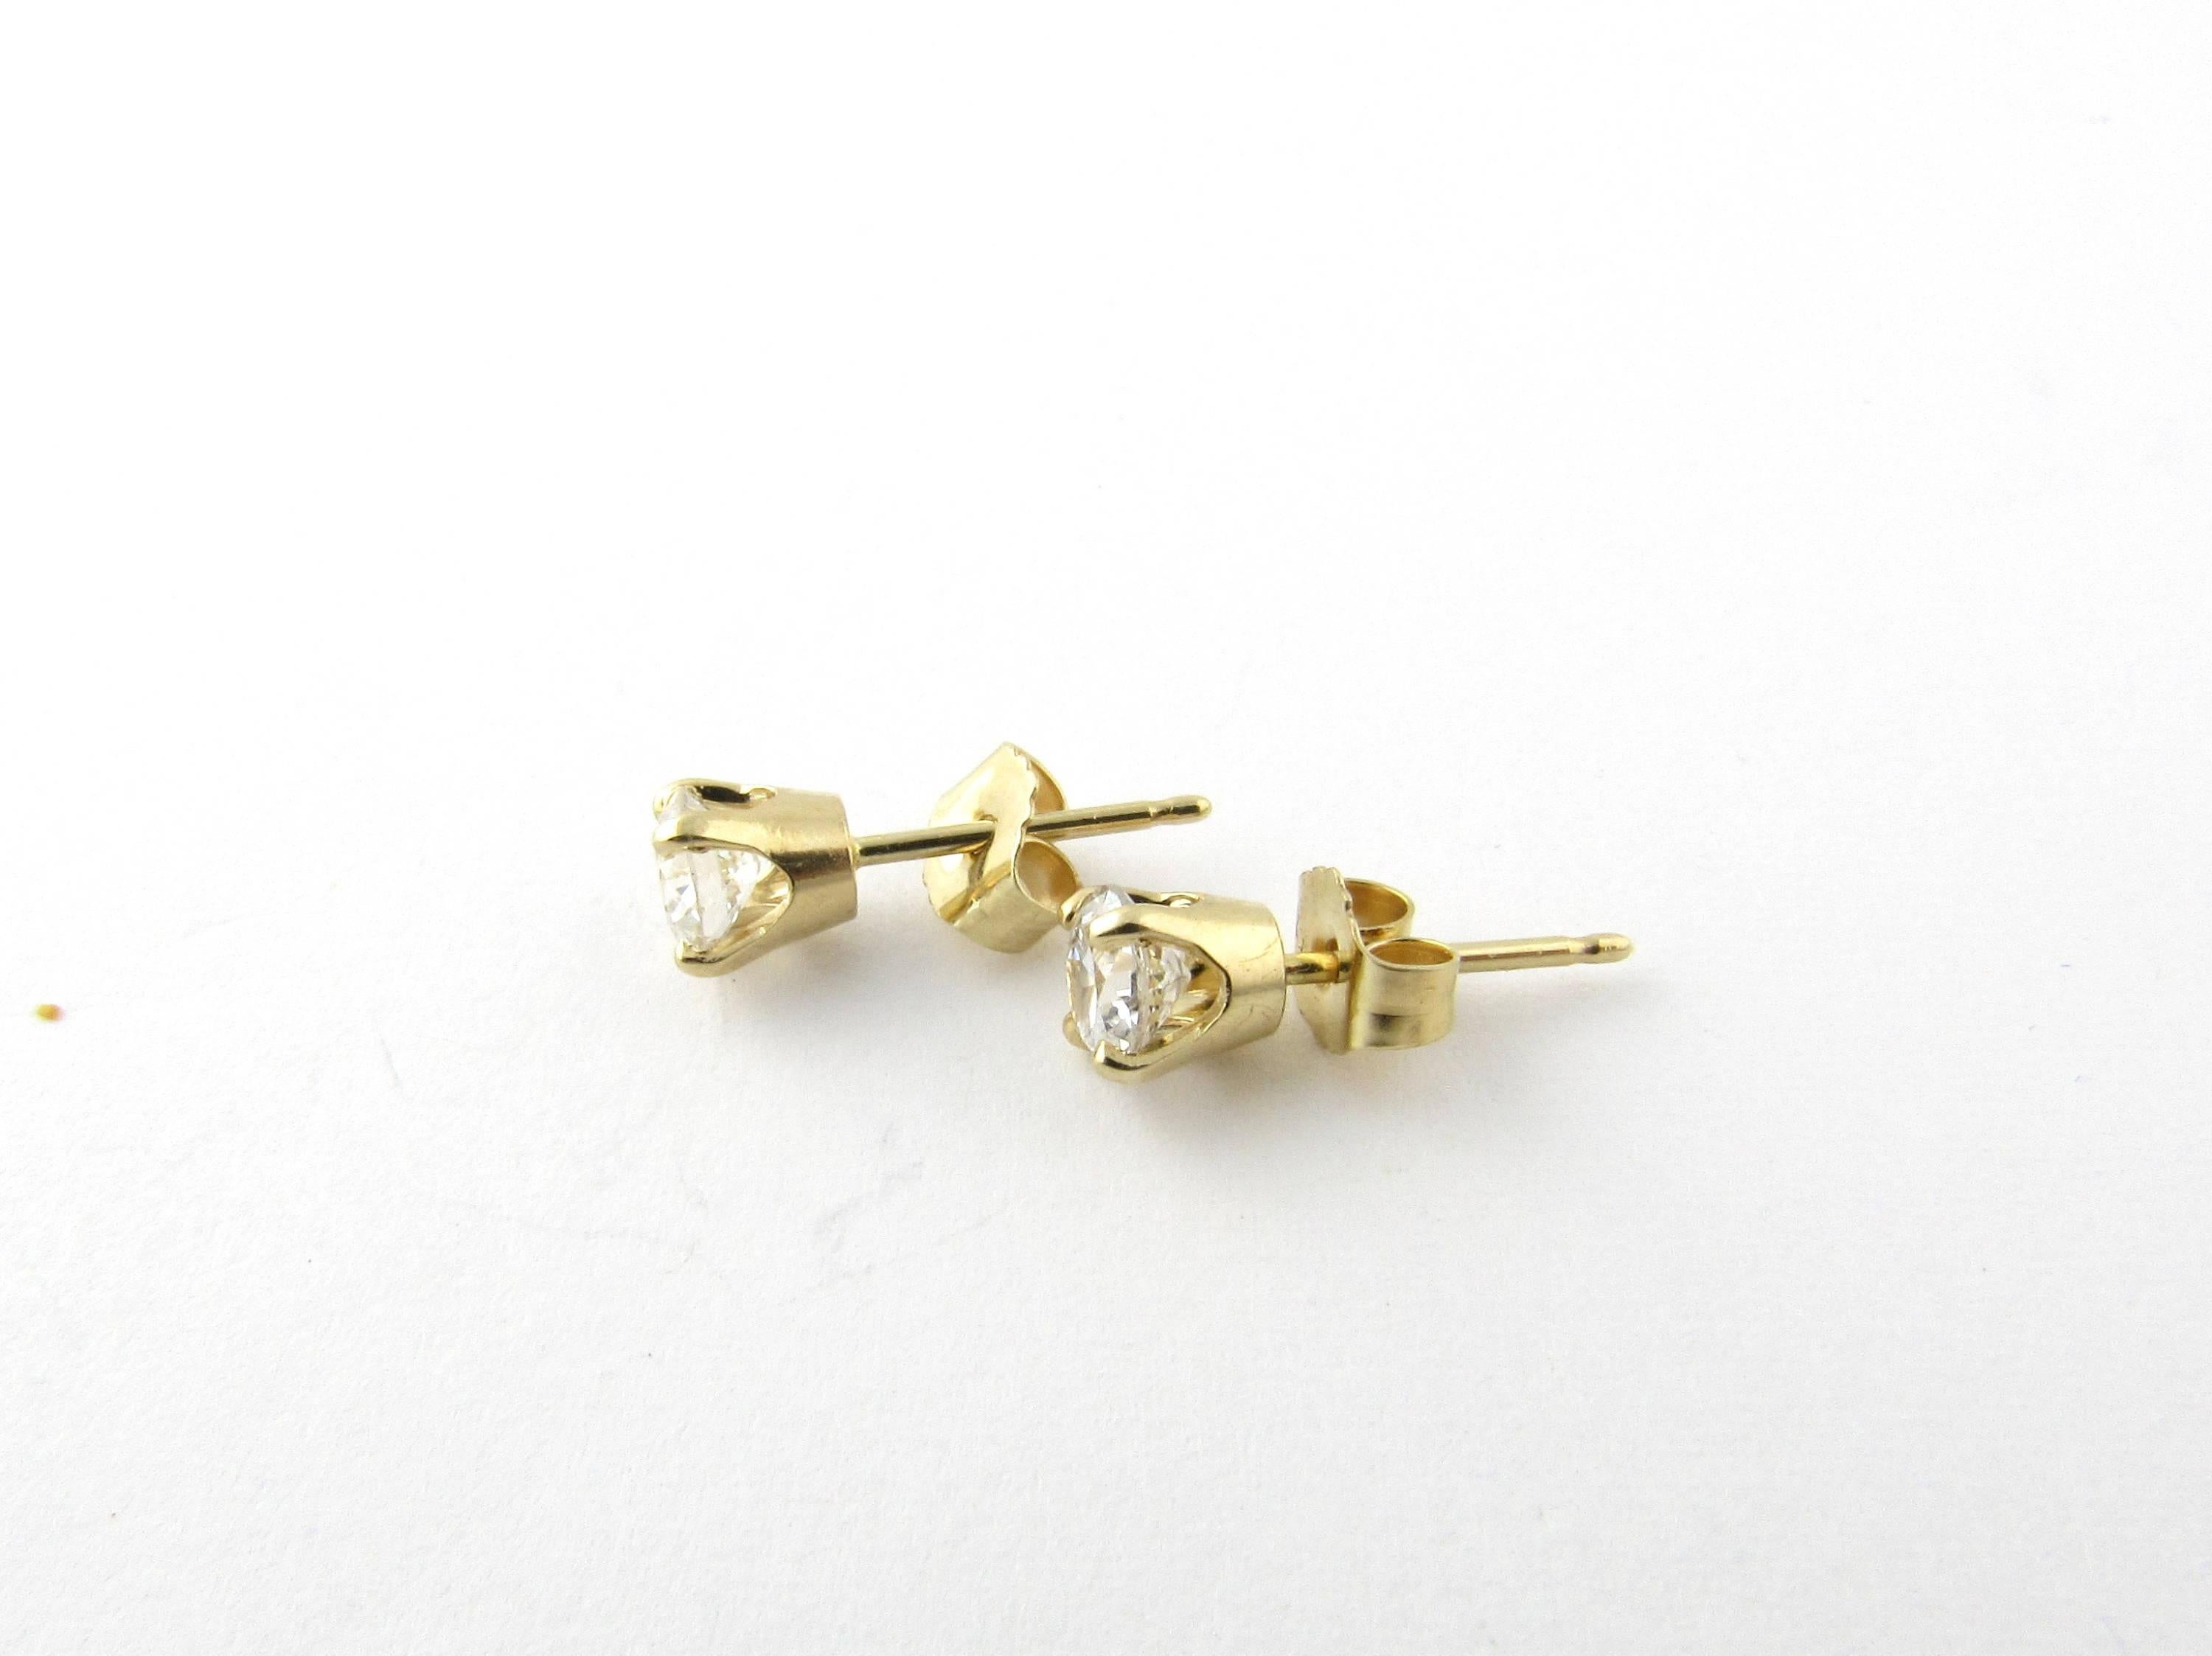 Vintage 14 Karat Yellow Gold Diamond Stud Earrings .60 ct.
These classic stud earrings each feature one round brilliant cut diamond (.30 ct.) in a four prong yellow gold setting. Push back closures. Approximate total diamond weight: .60 ct. Diamond